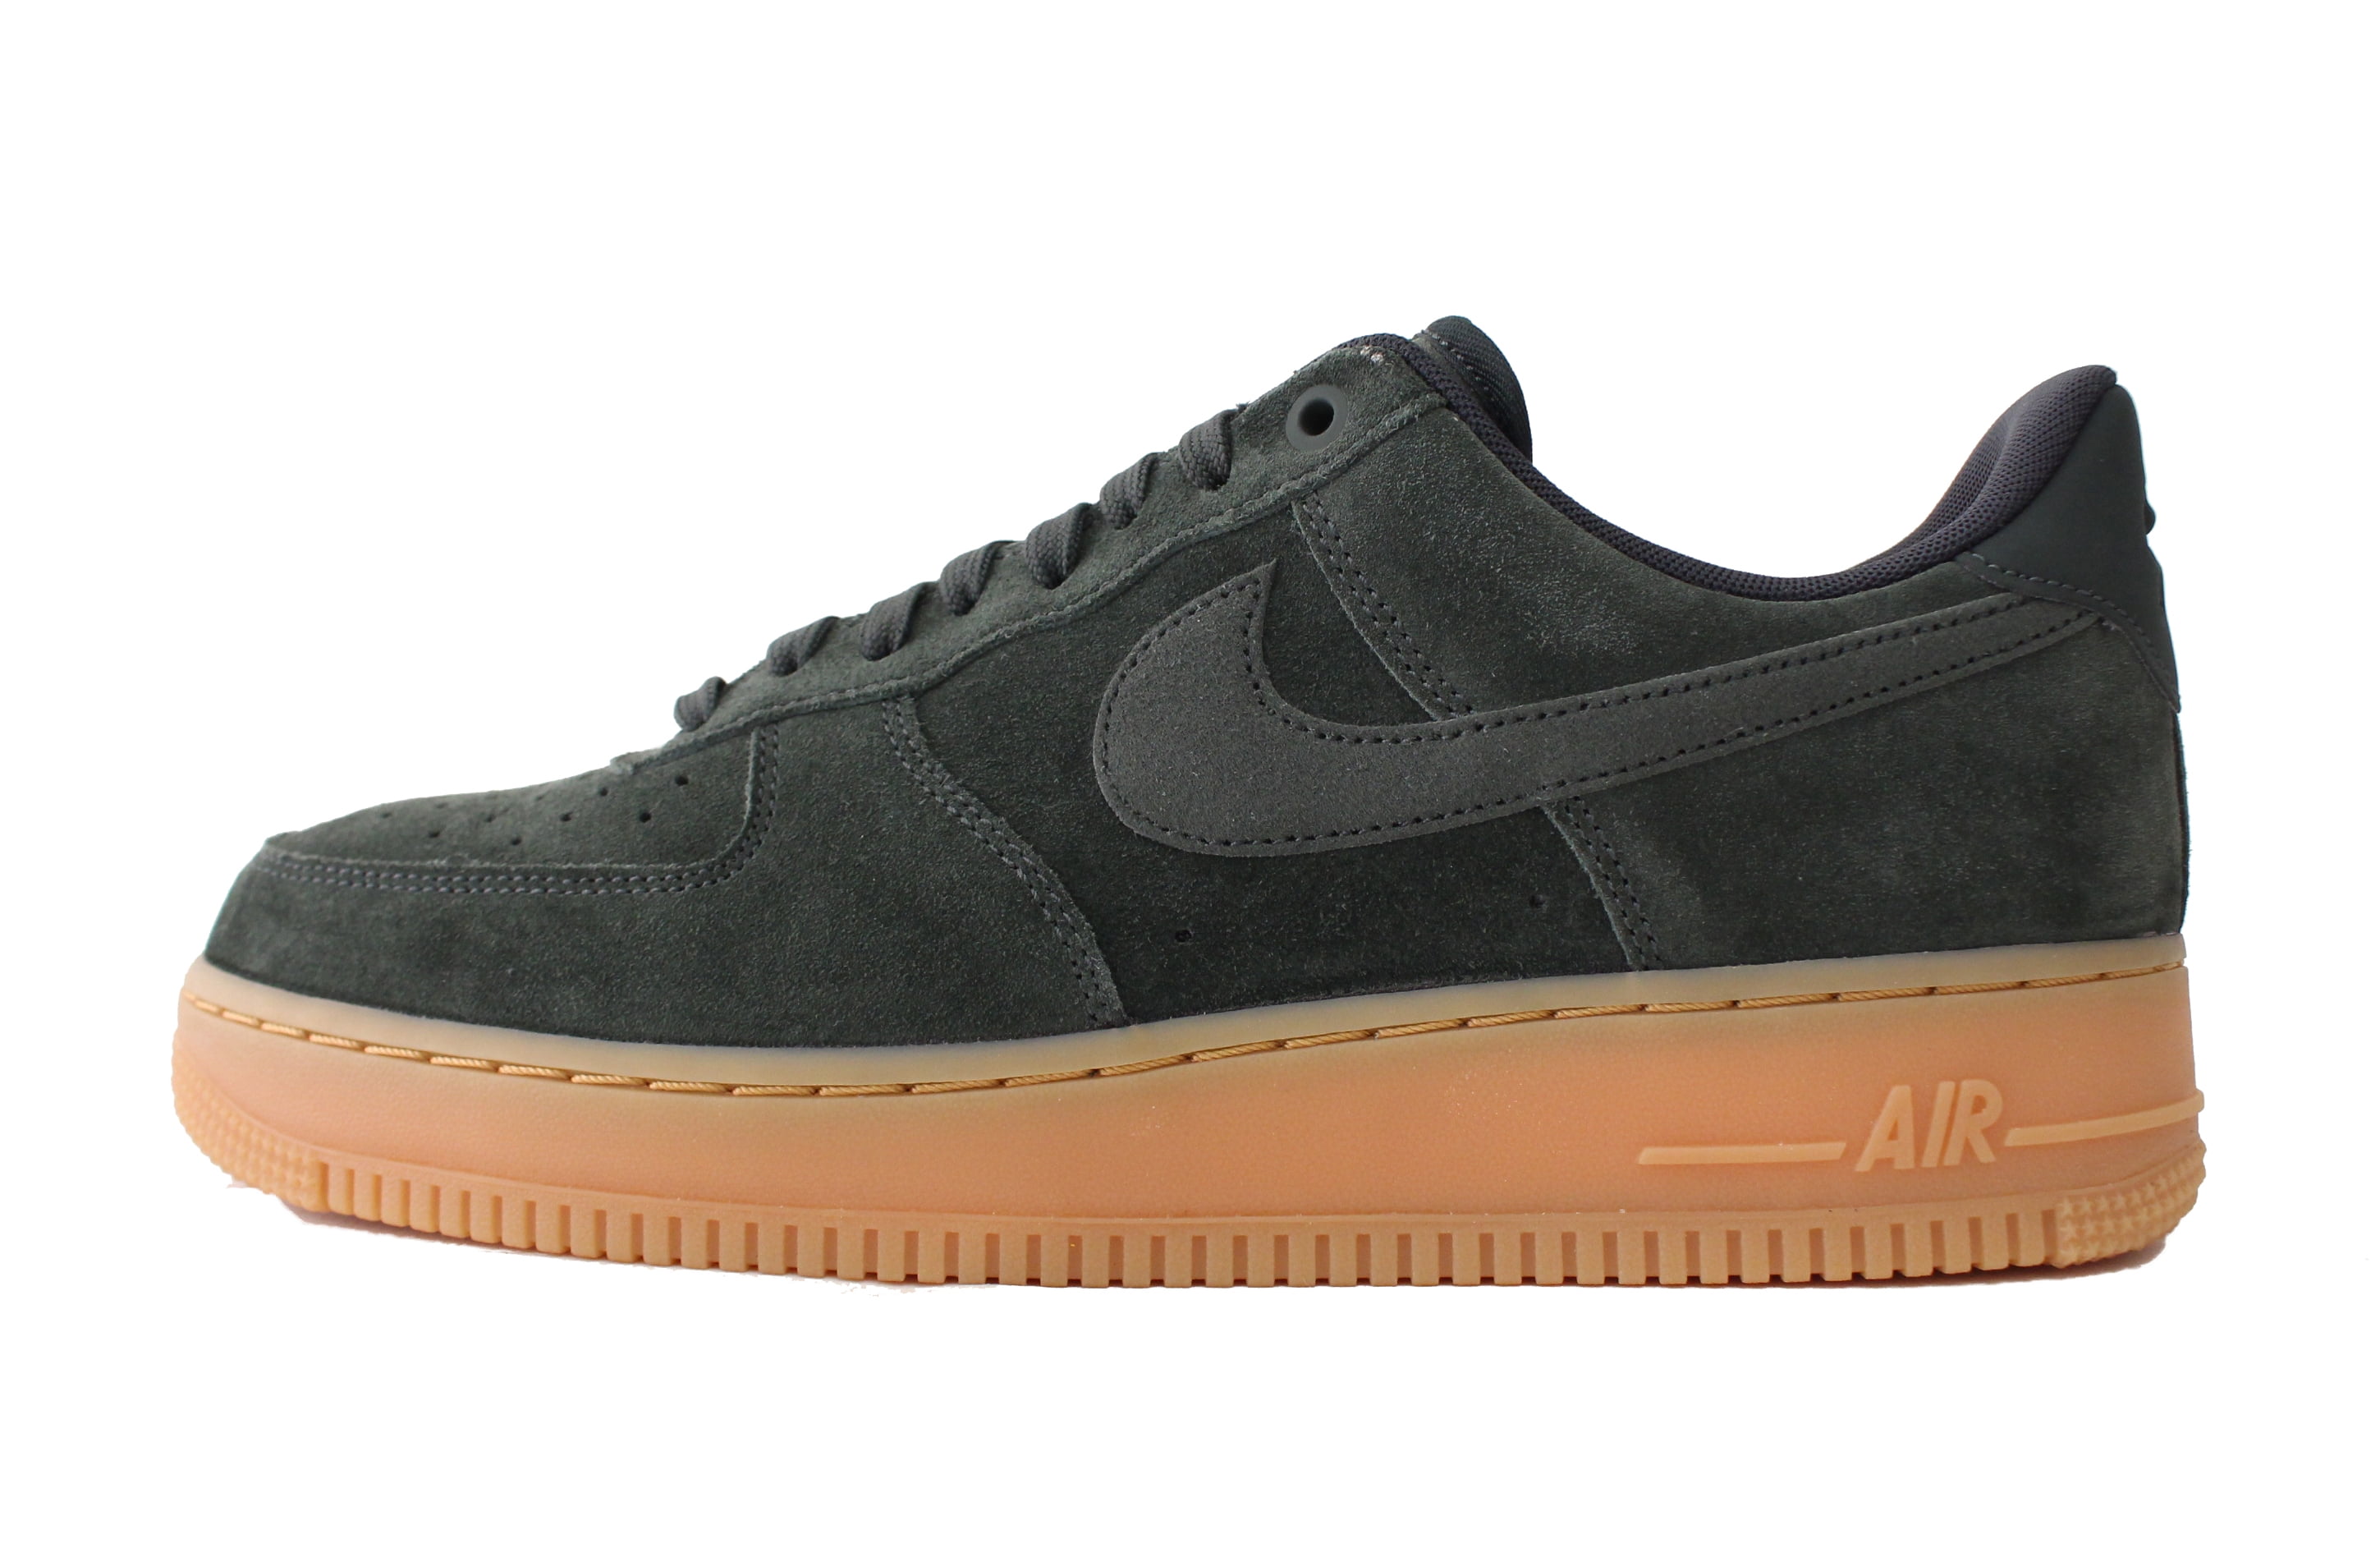 Nike Air Force 1 07 LV8 Suede 'Outdoor Green' AA1117-300 - KICKS CREW